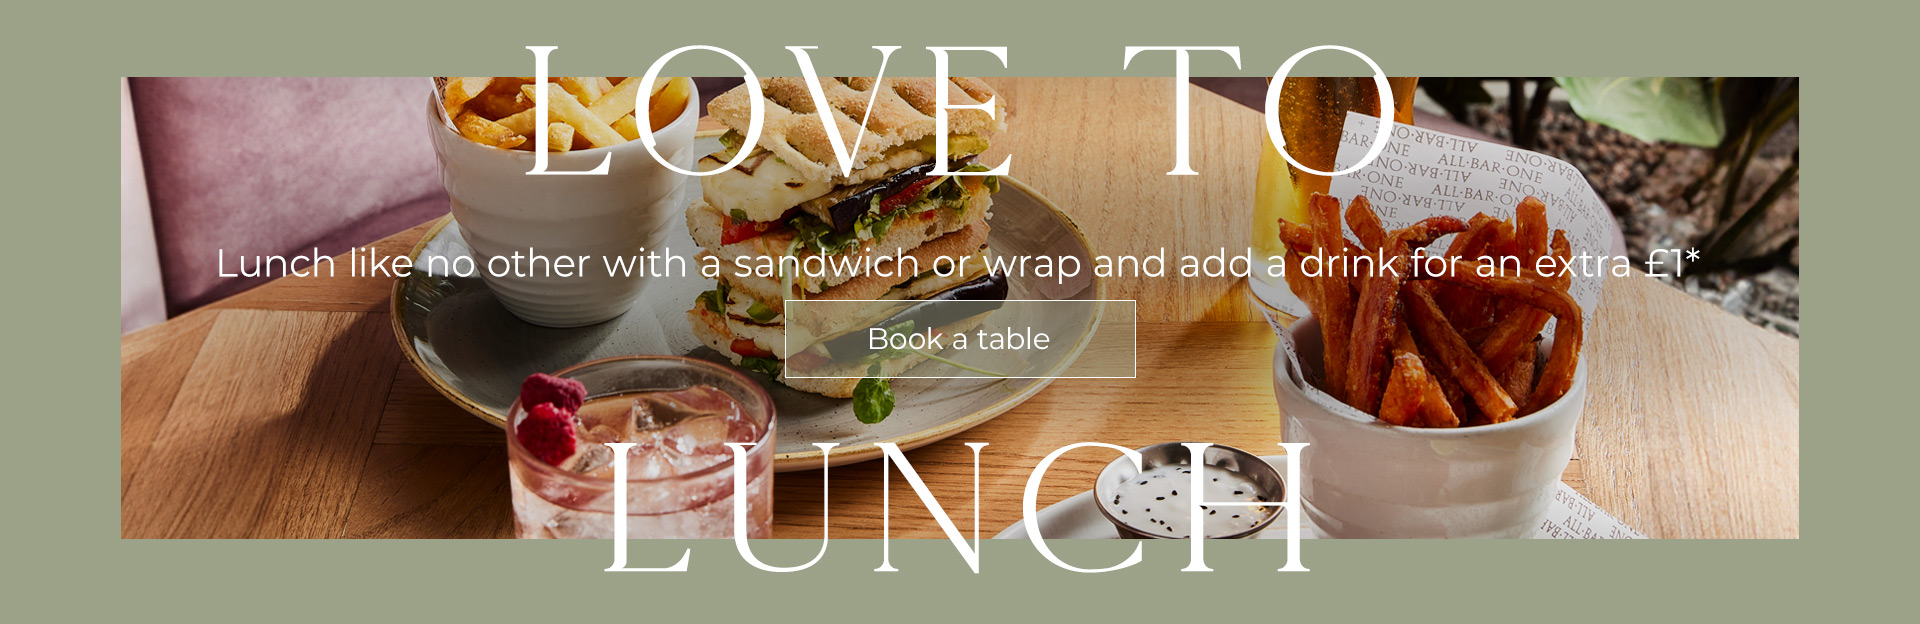 Lunch Offer at All Bar One Moorgate